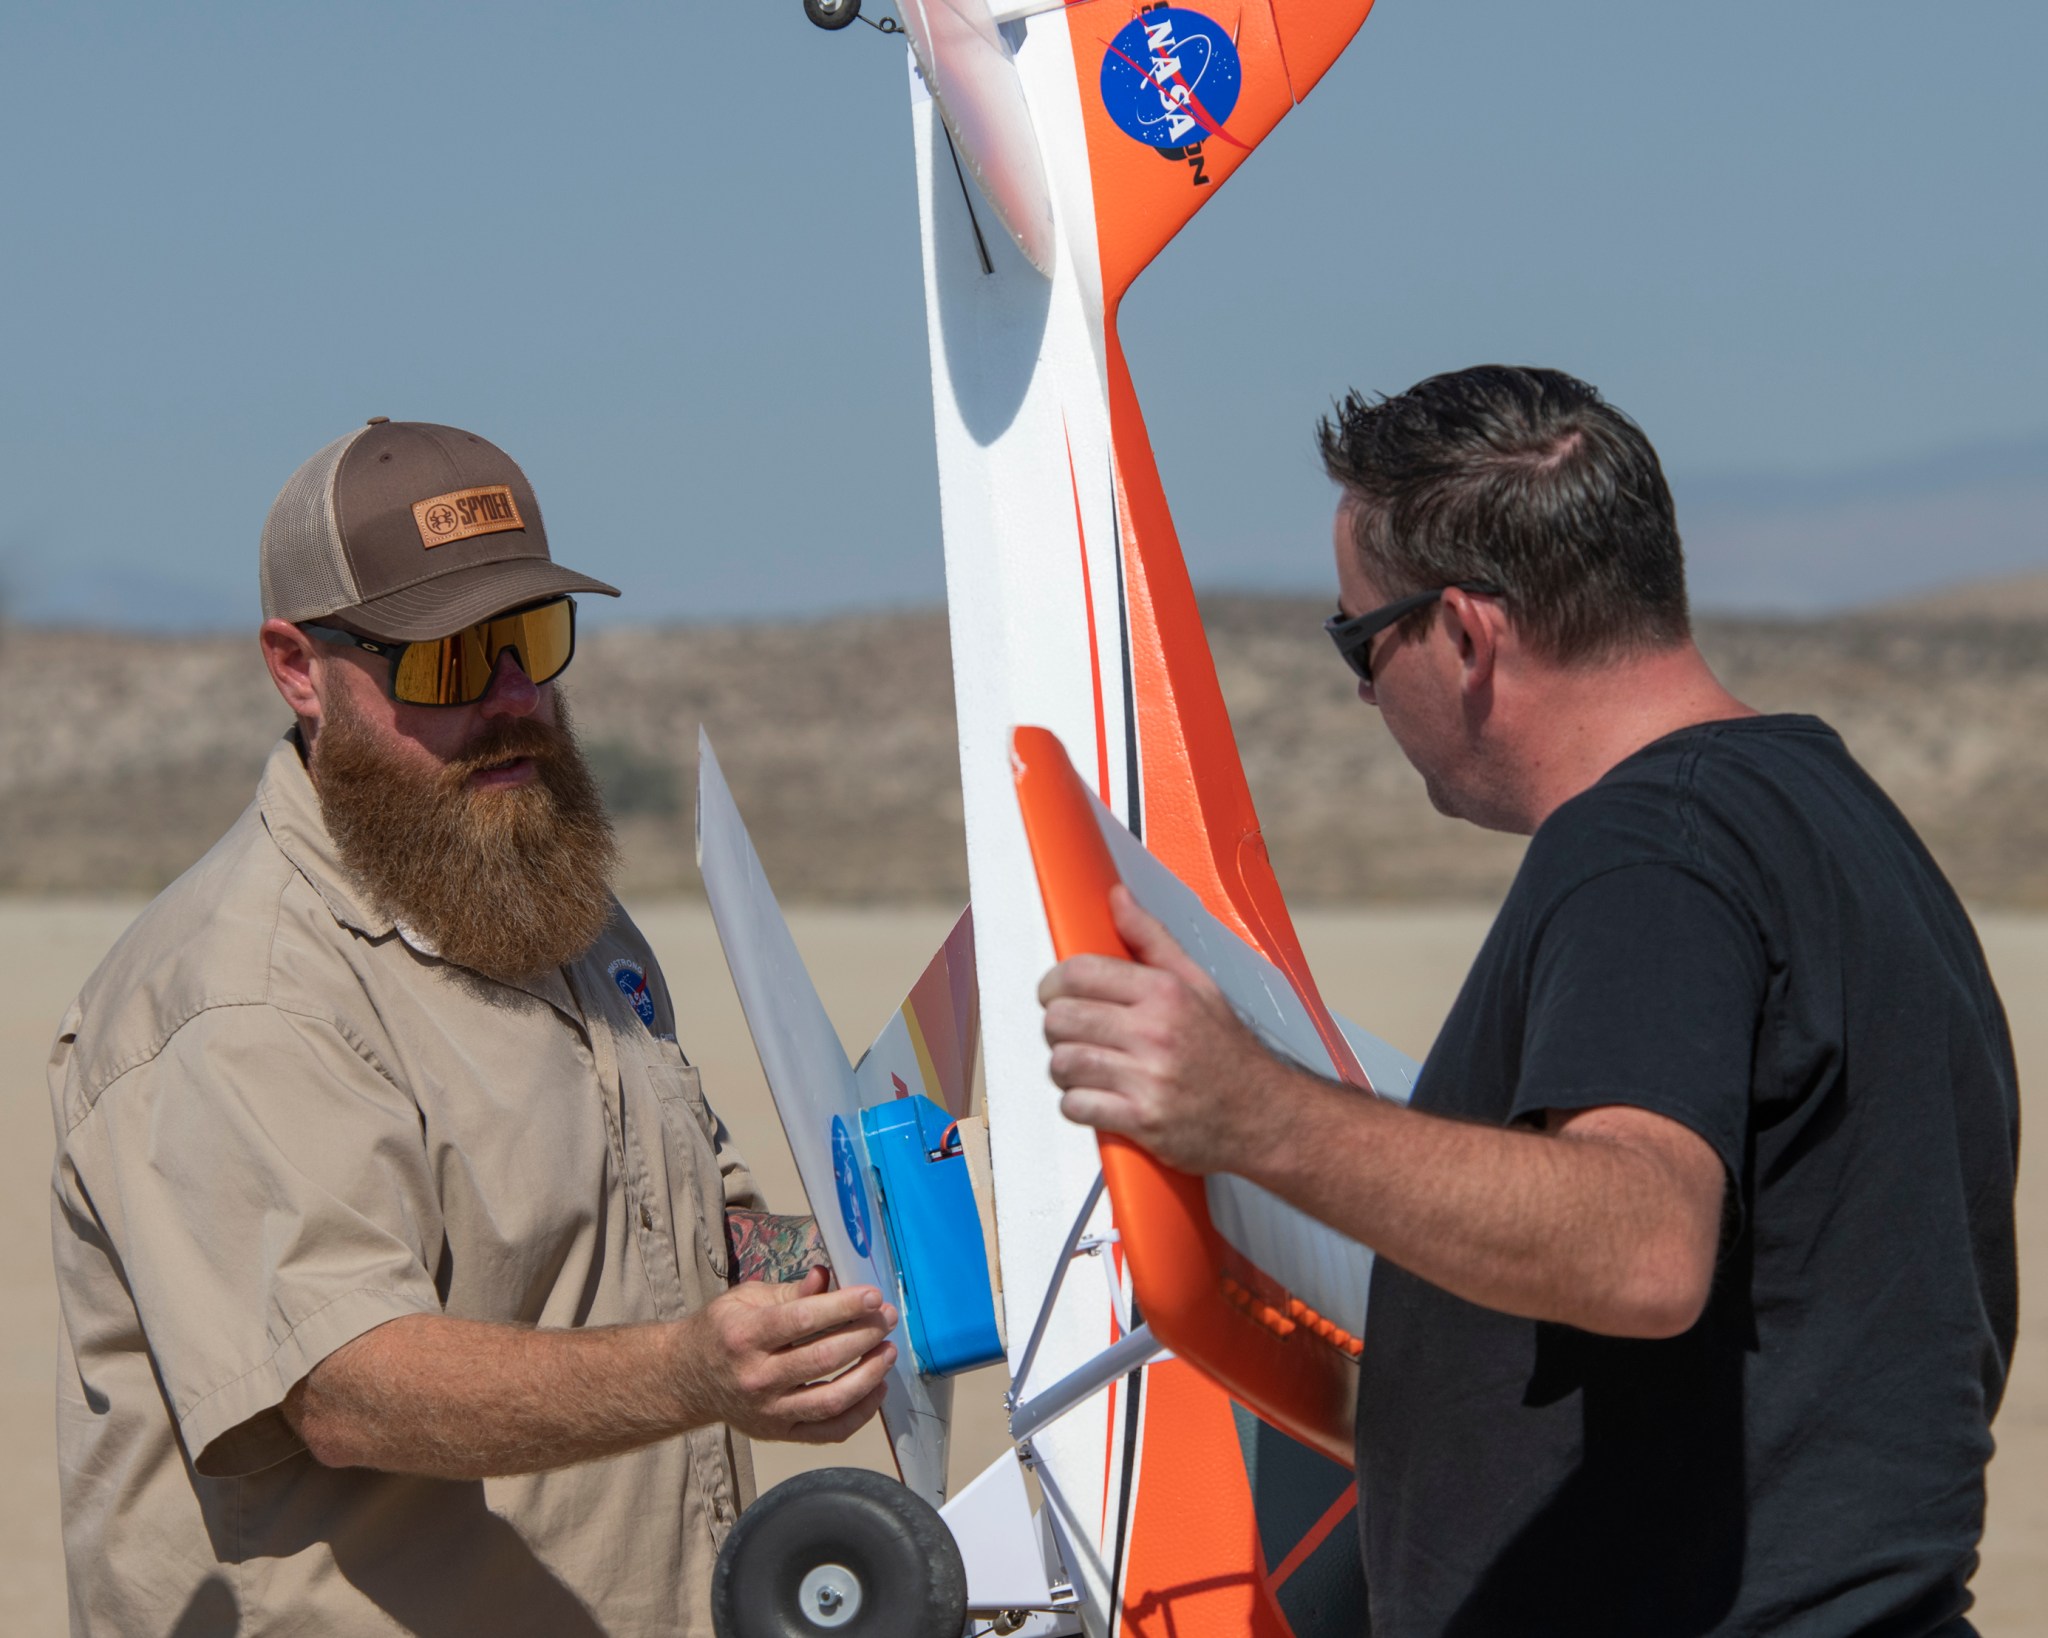 Justin Hall, left, attaches the Preliminary Research Aerodynamic Design to Land on Mars, or Prandtl-M, glider onto the Carbon-Z Cub, which Justin Link steadies. 